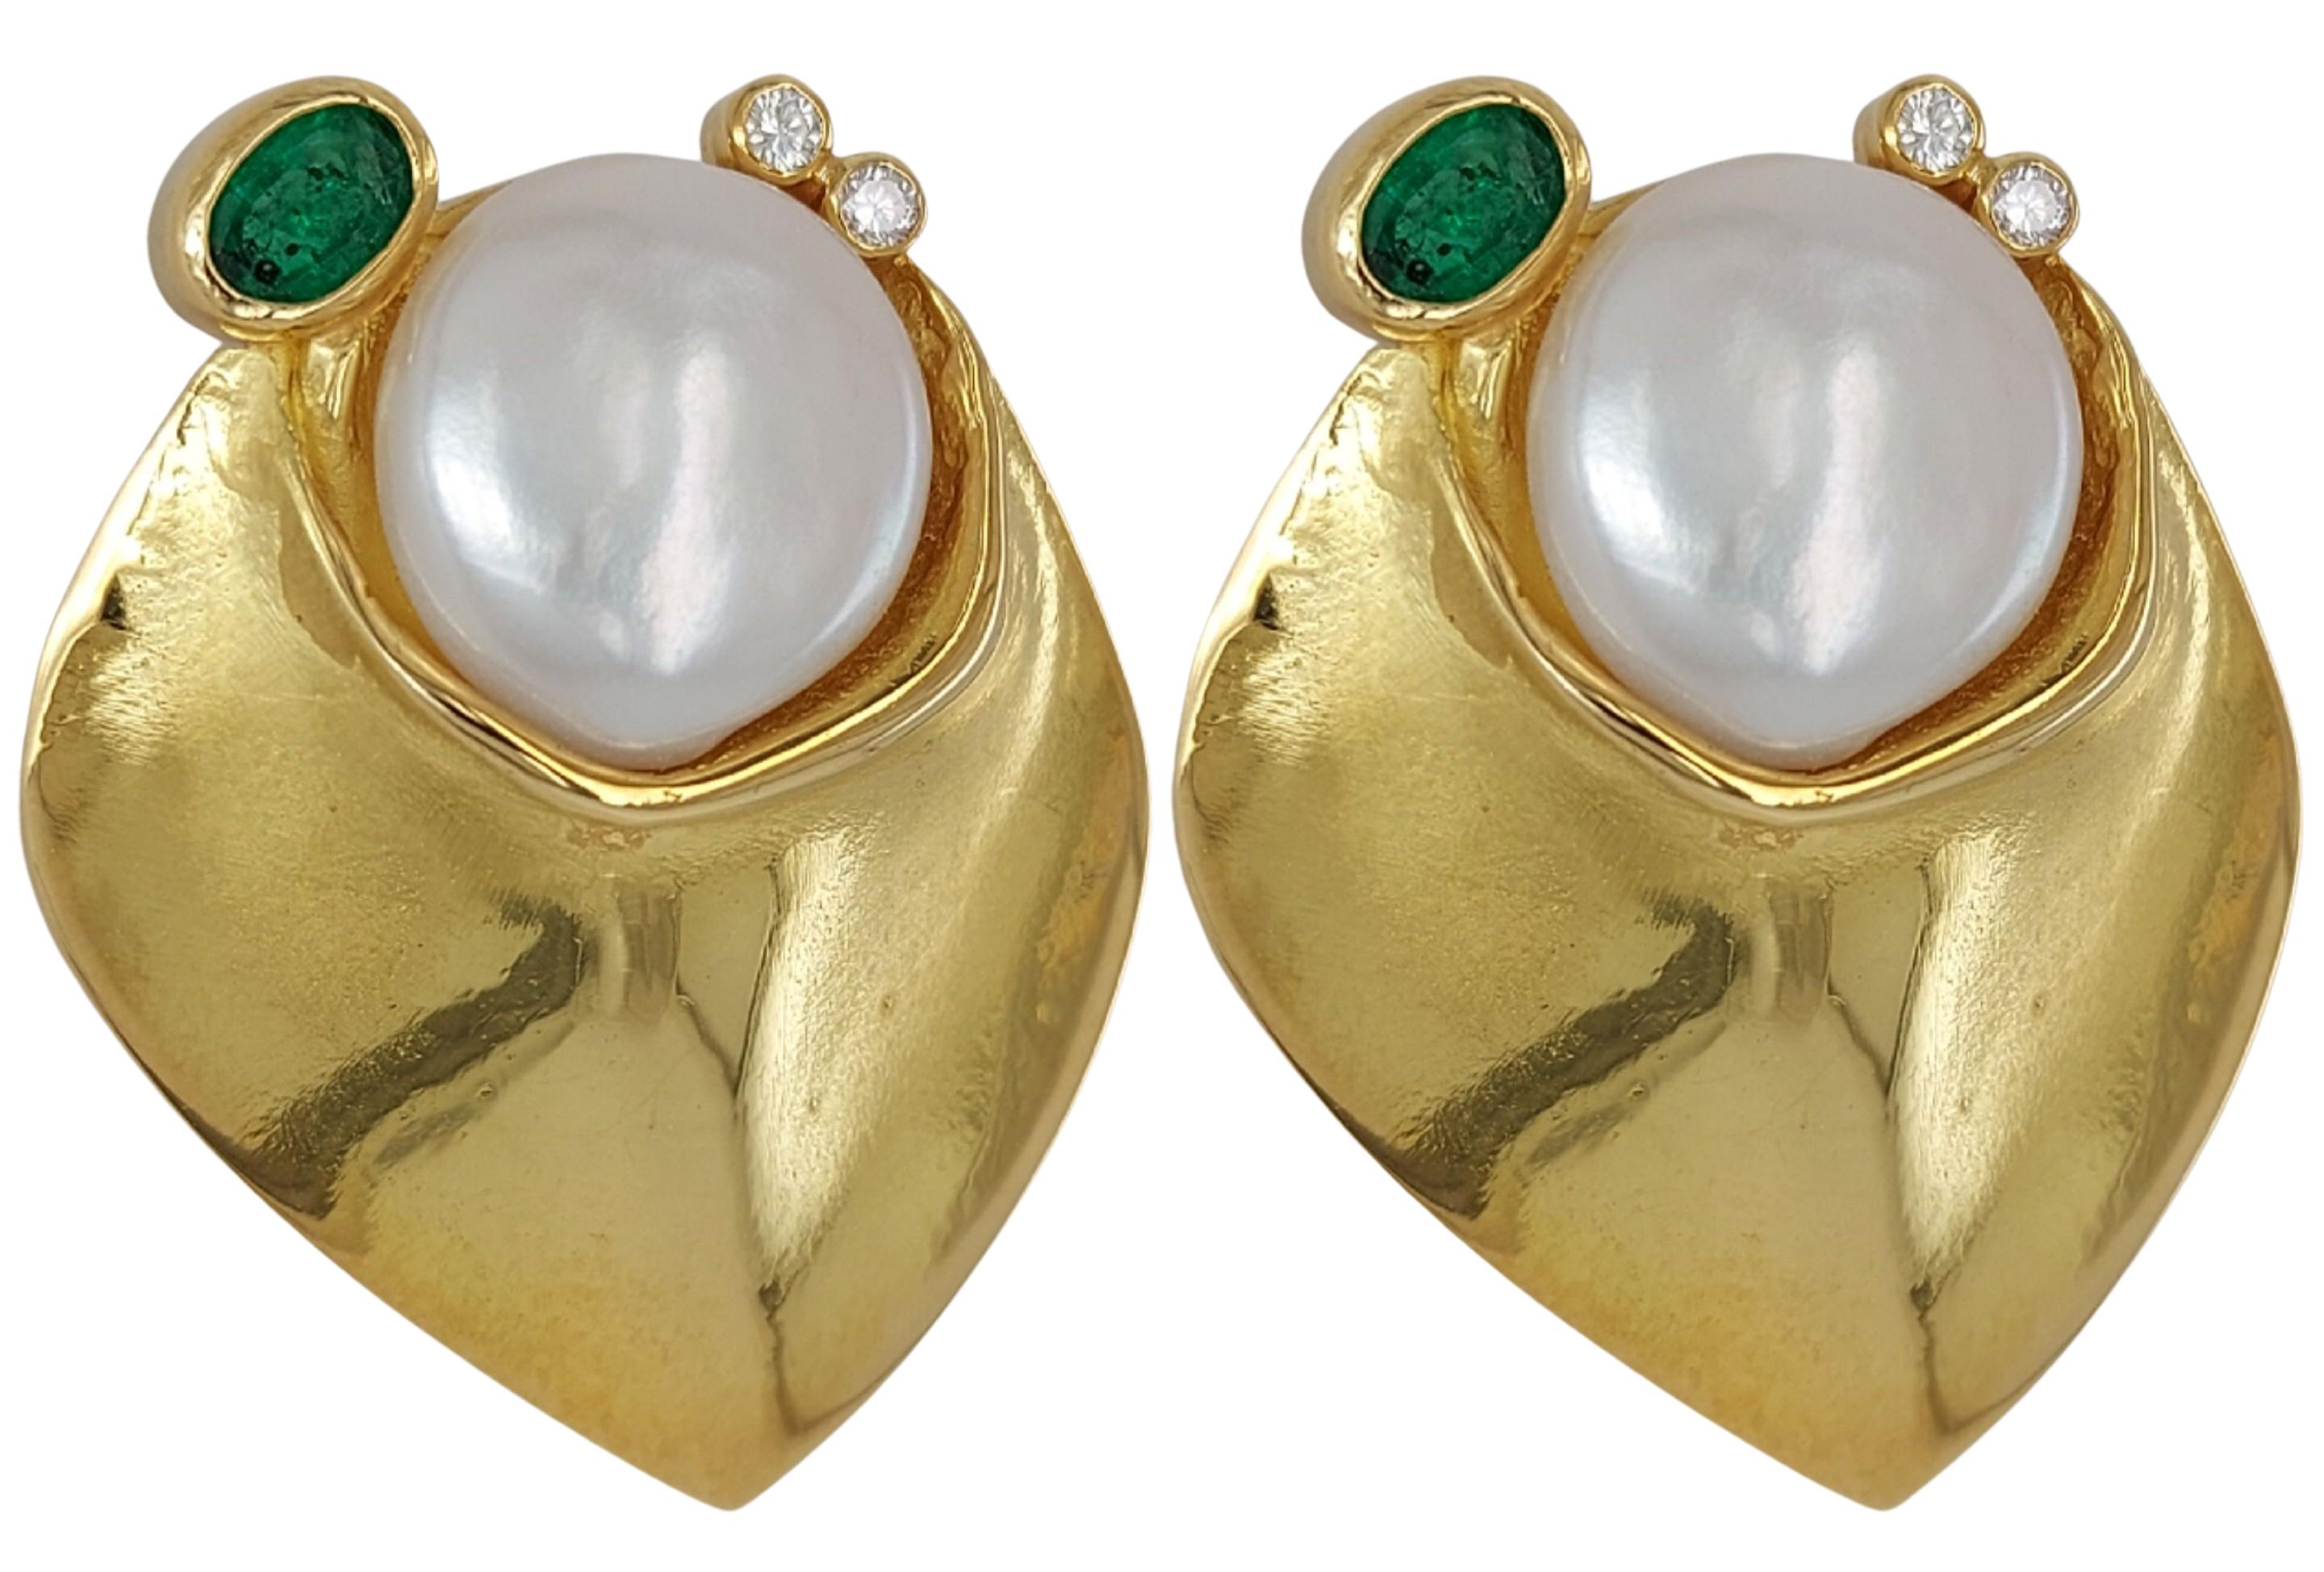 Unique hand crafted by the artist Jean Pierre De Saedeleer 18kt Yellow Gold Clip-On Earrings with Diamond, Emerald, Pearl

Pièce Unique ! 

Pearl: Diameter 14mm

Emerald: 2 emeralds together 0.75 carat

Diamond: 4 brilliant cut diamonds 0,14